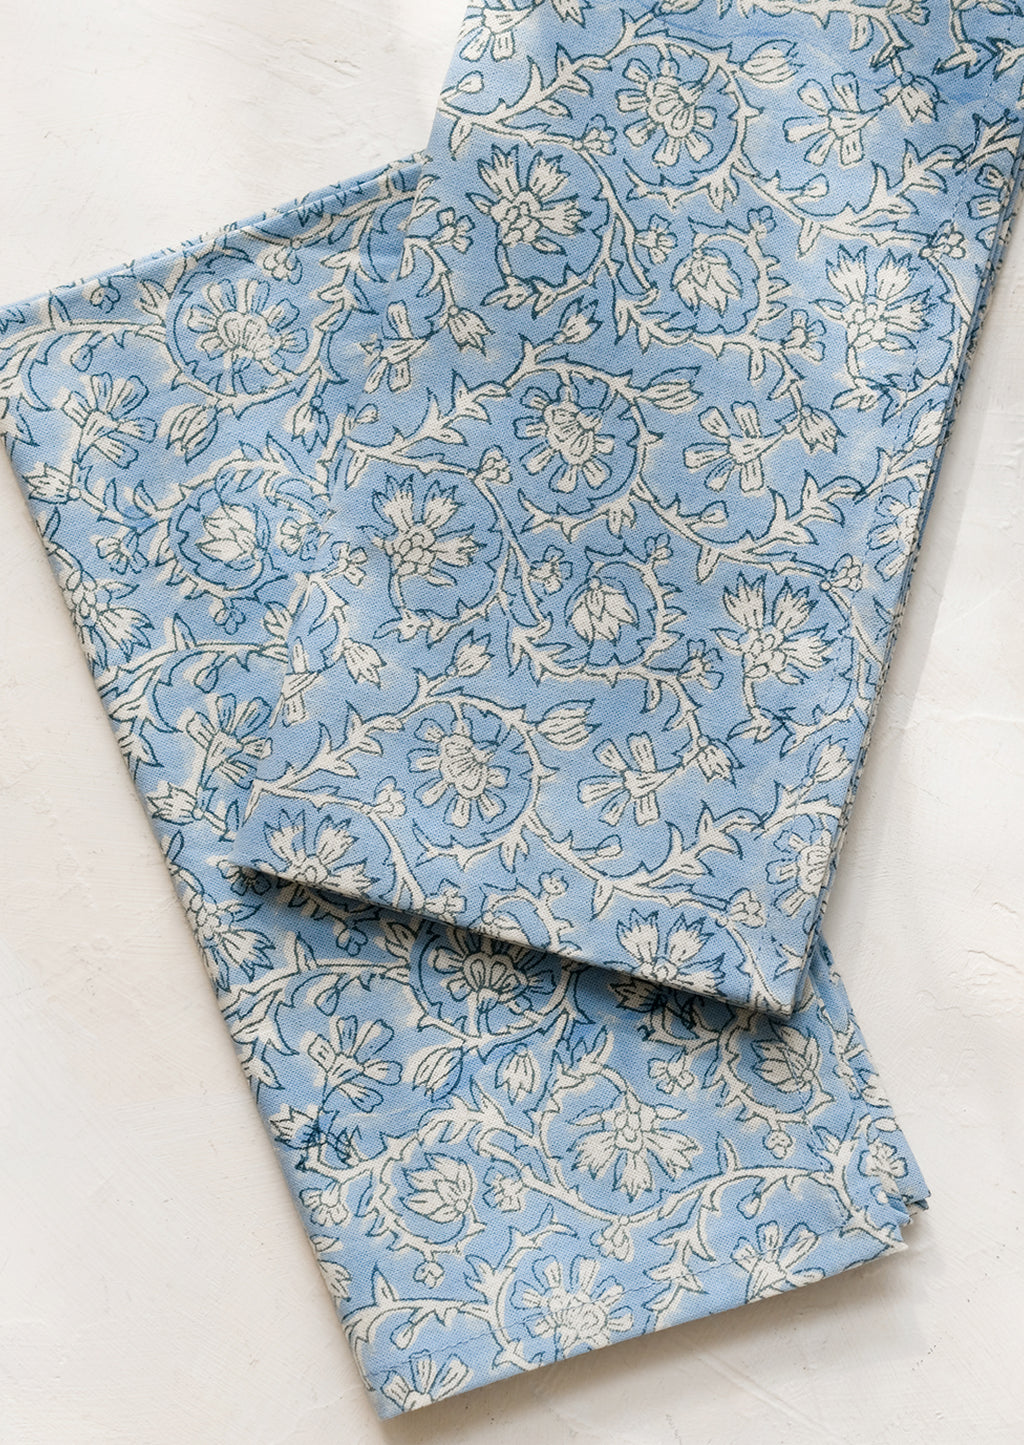 Cornflower Multi: A pair of blue and white colored napkins with floral print.